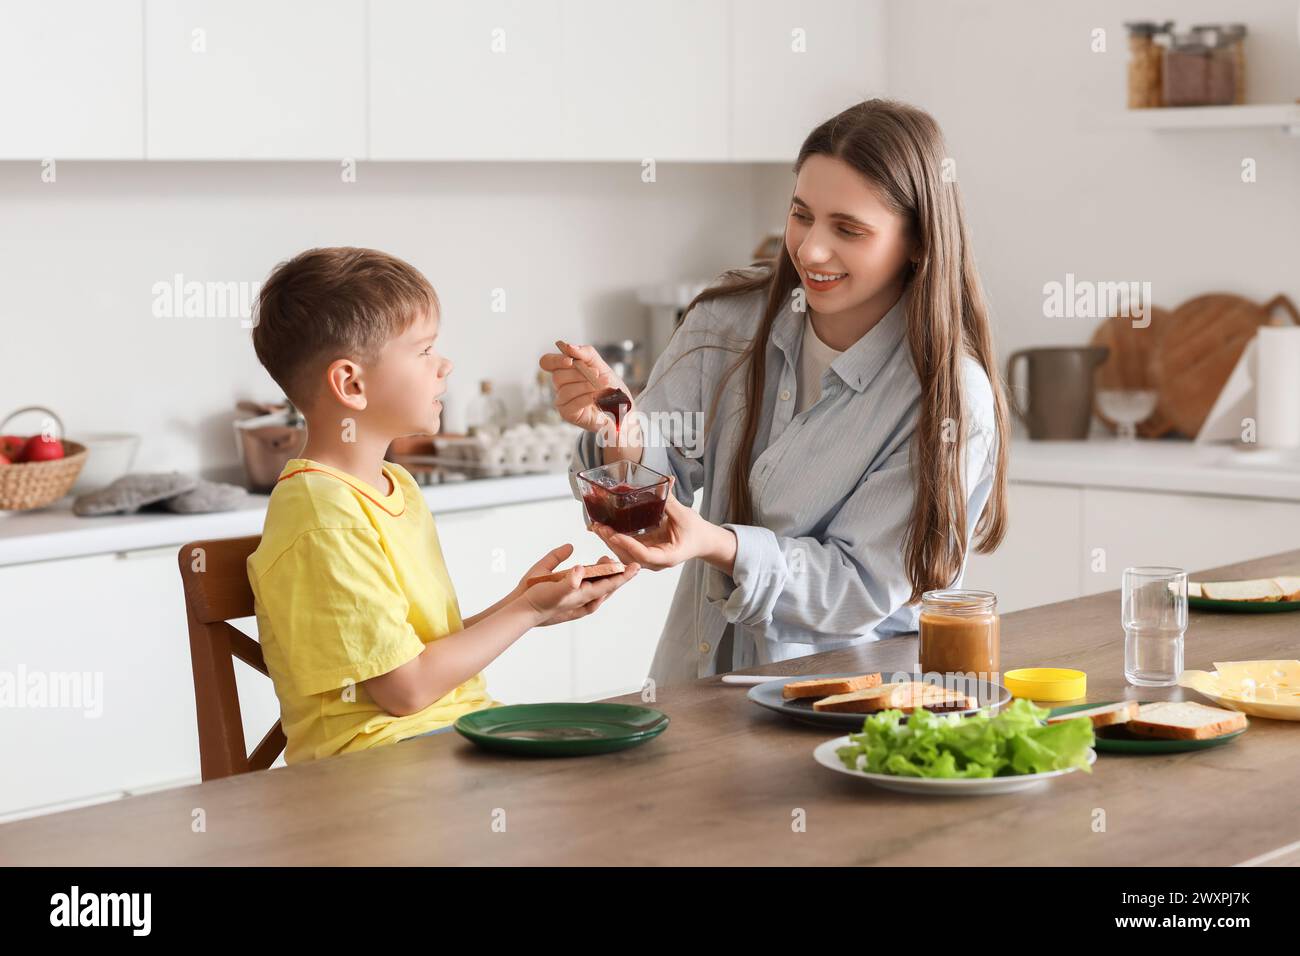 Little boy with his mother making toast with jam in kitchen Stock Photo